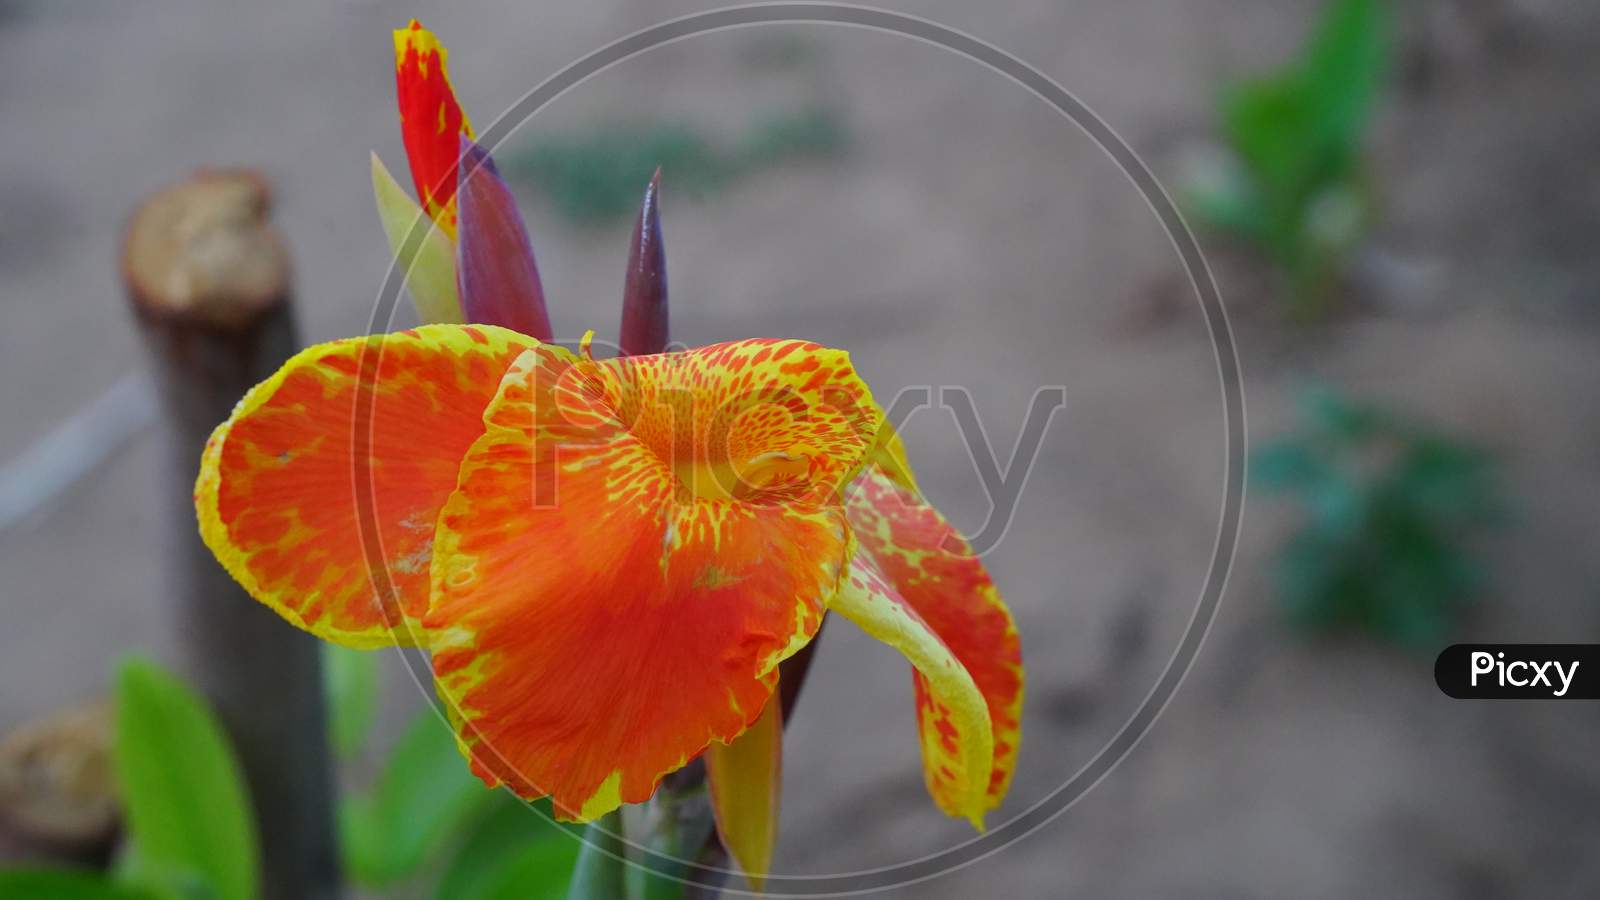 Yellow Flower With Red Spots, Canna Indica Yellow Flower Blooming With Many Colors. Indian Canna Flower In Selective Focus